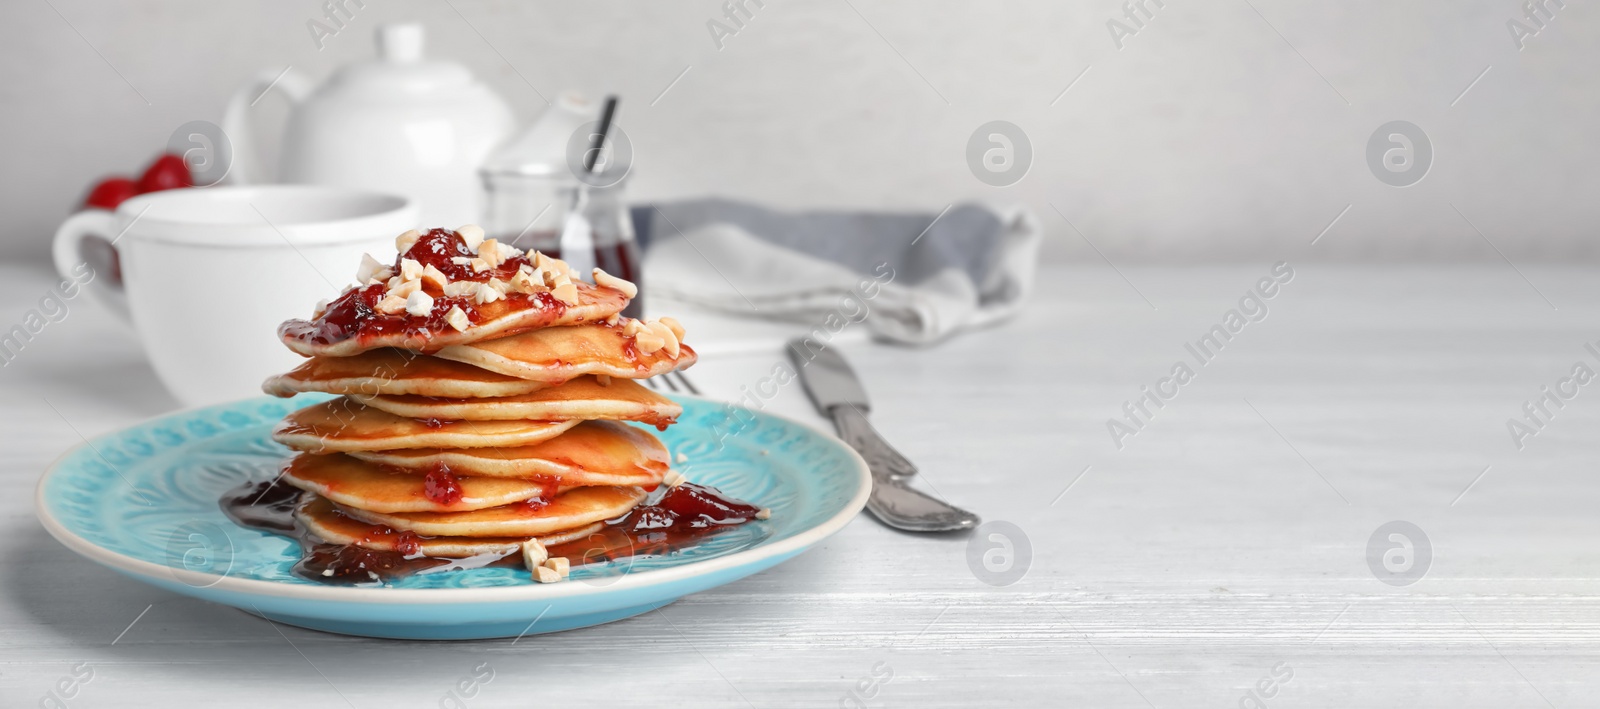 Image of Delicious pancakes with jam and nuts served for breakfast on table, space for text. Banner design